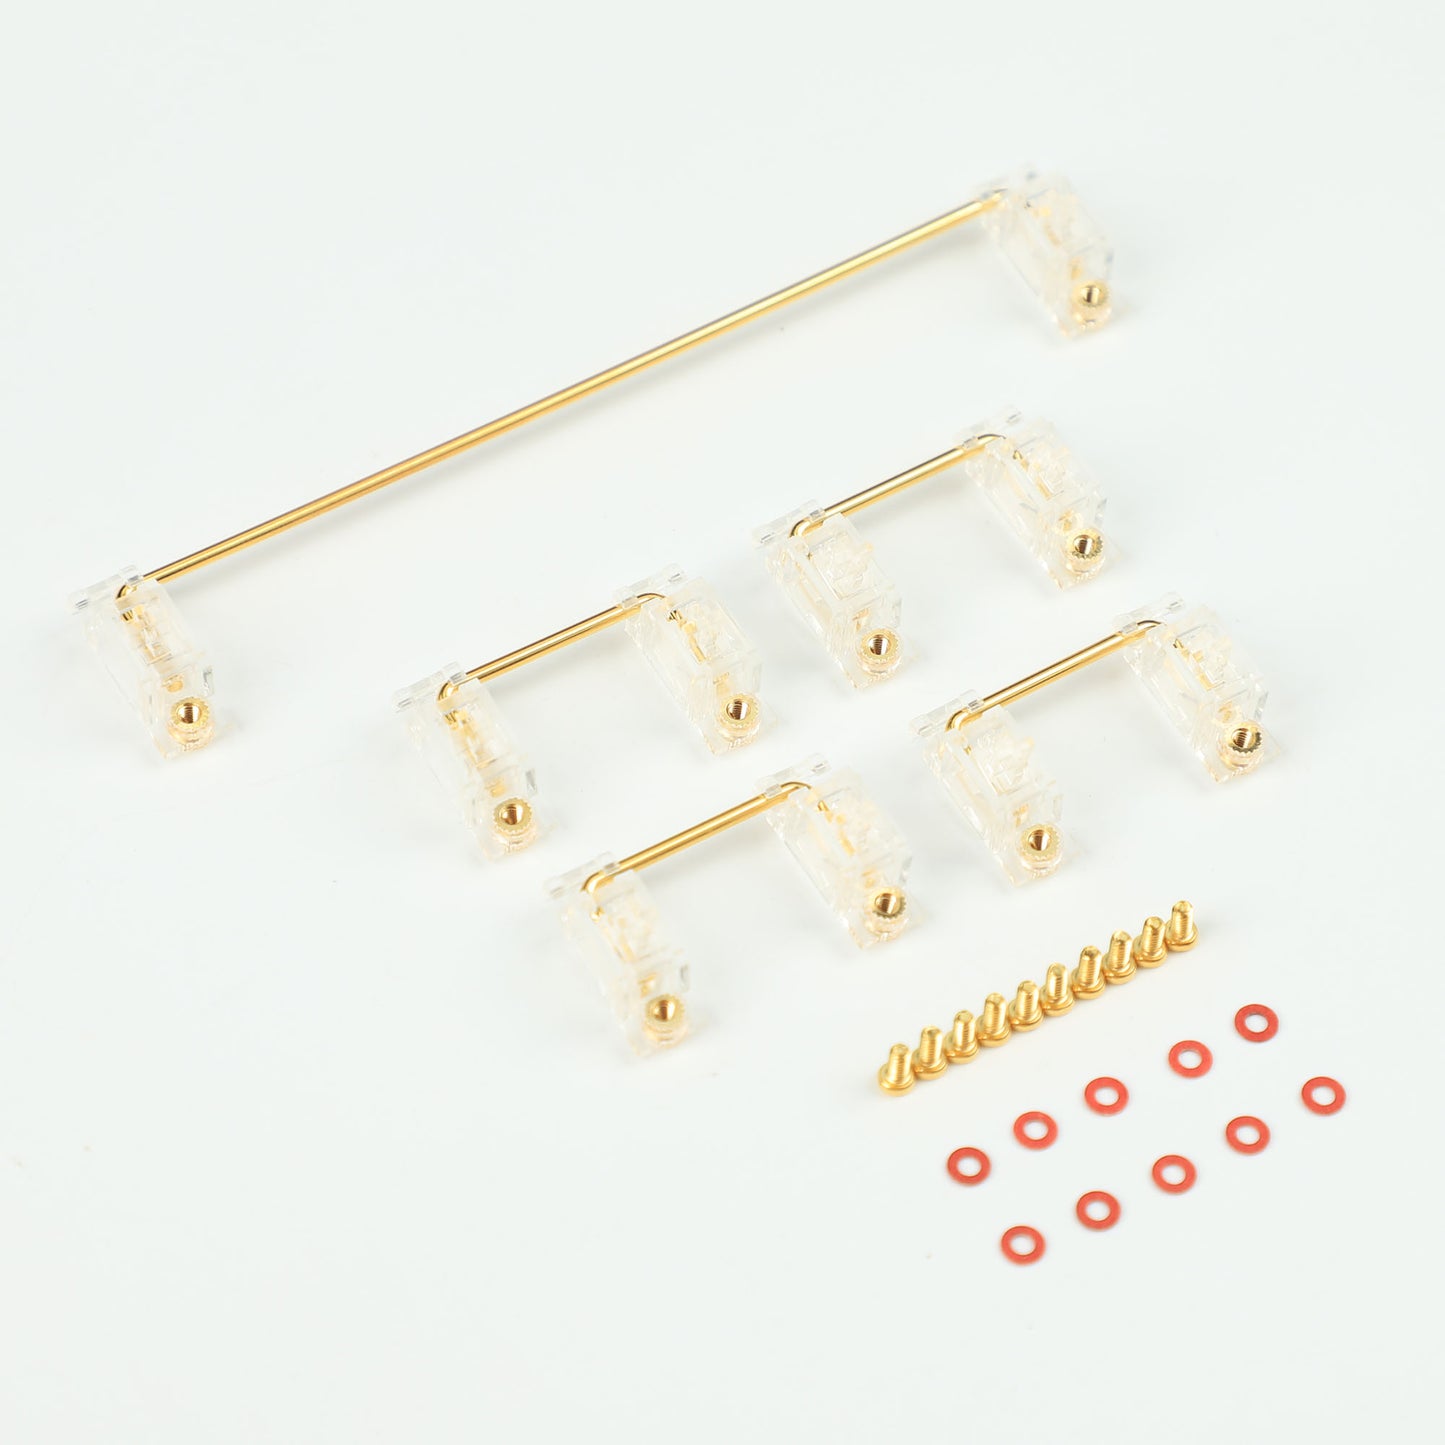 JWK DK V2 PCB Screw-in Stabilizers(Gold Wire Clear Or Black-Clear/Special Design No Dropping Wire)